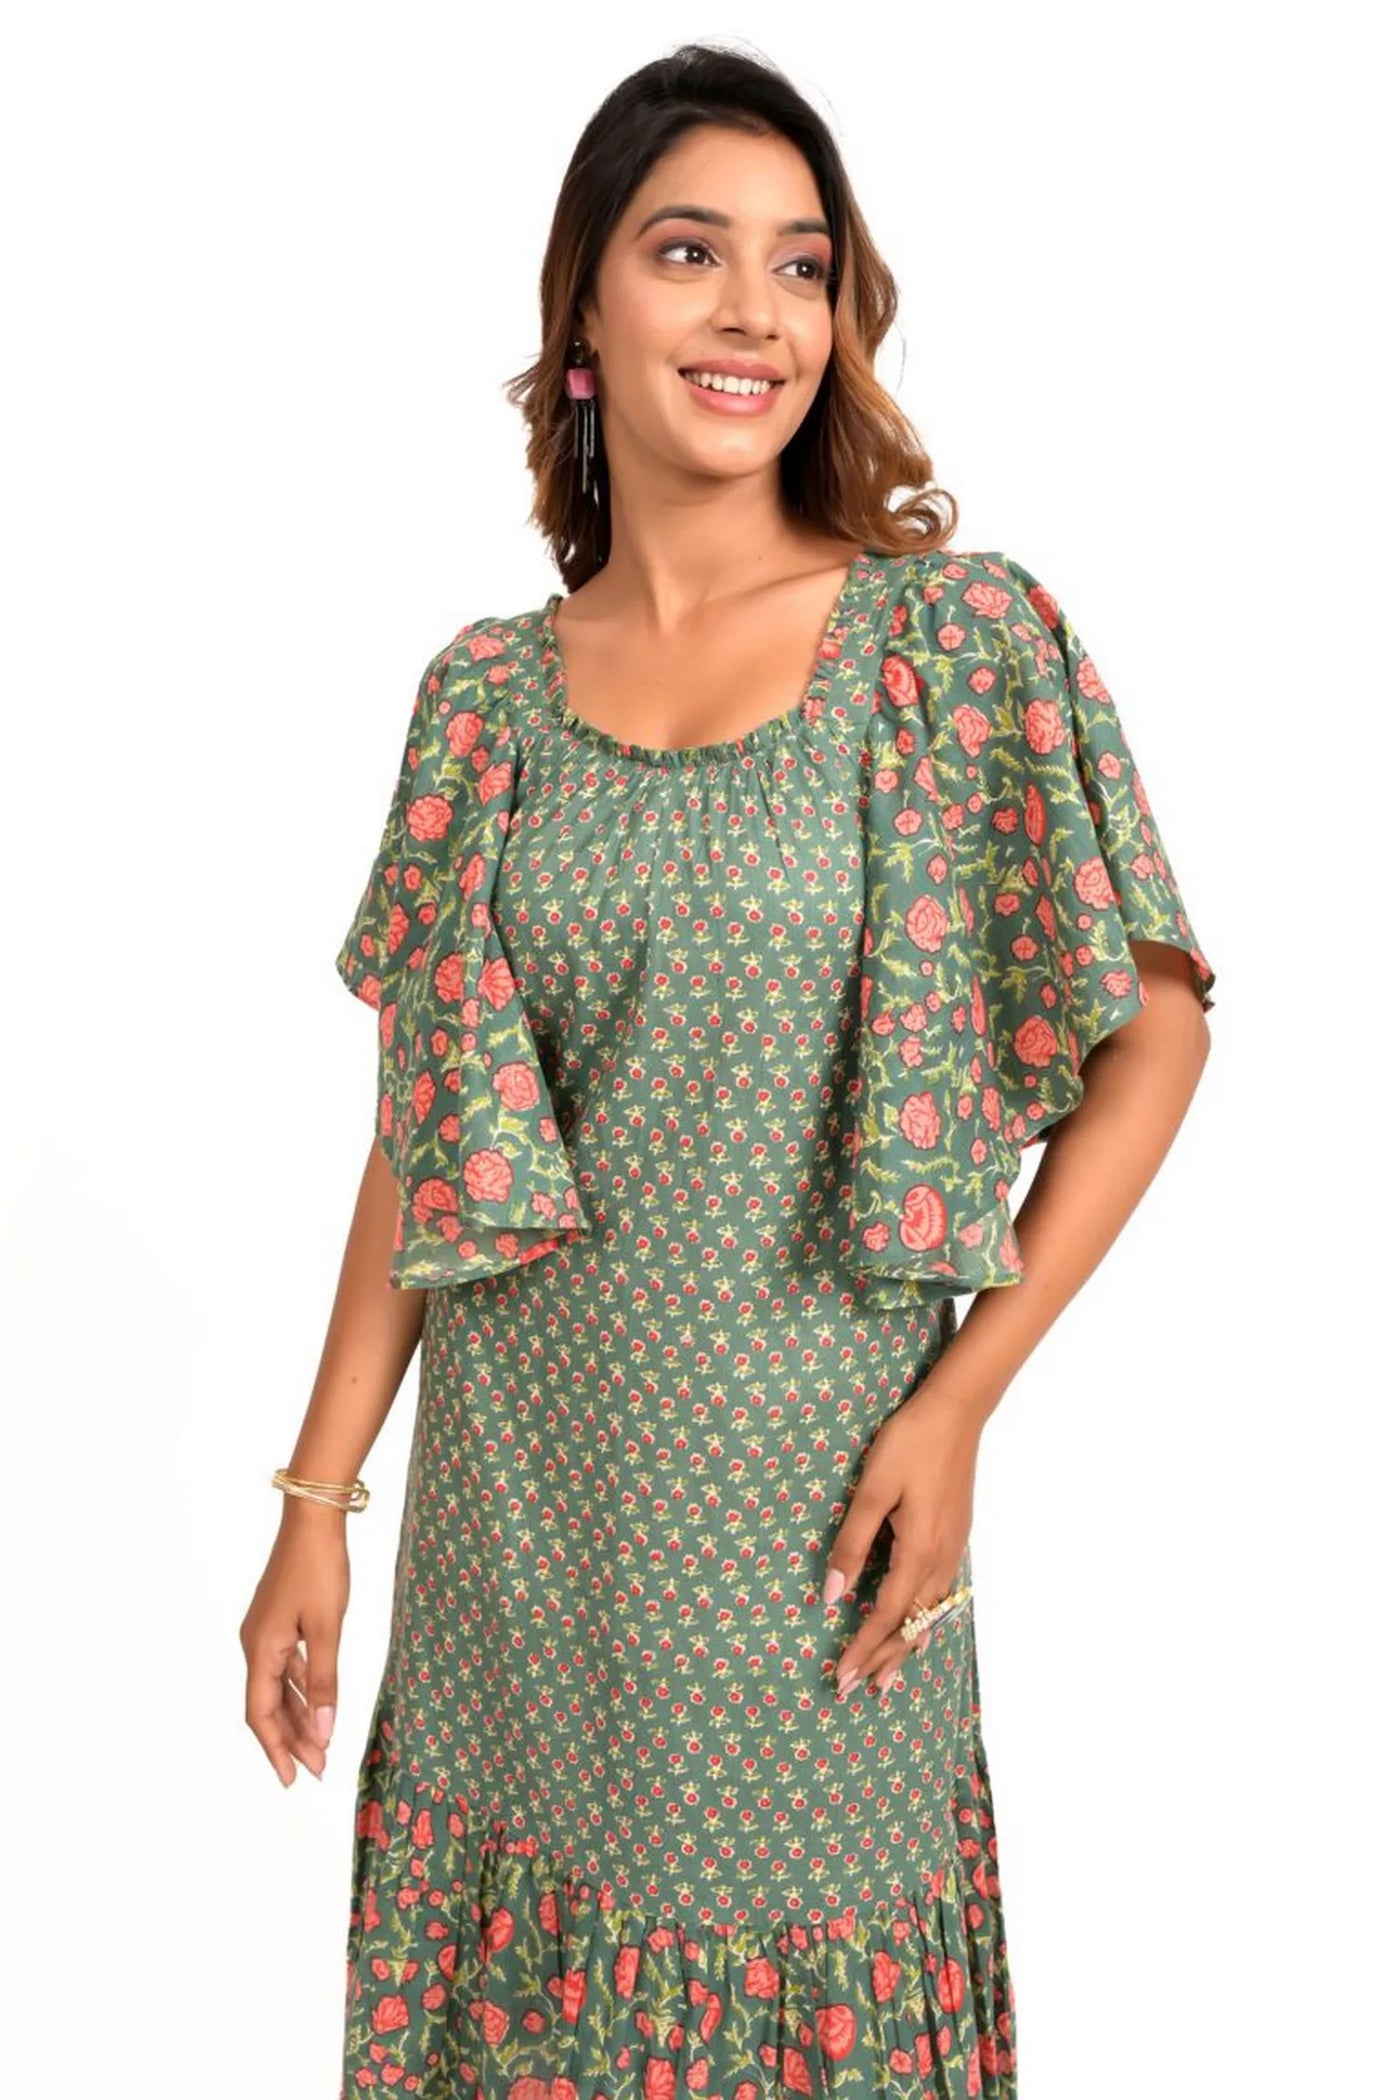 Green and Peach Printed Frill Dress